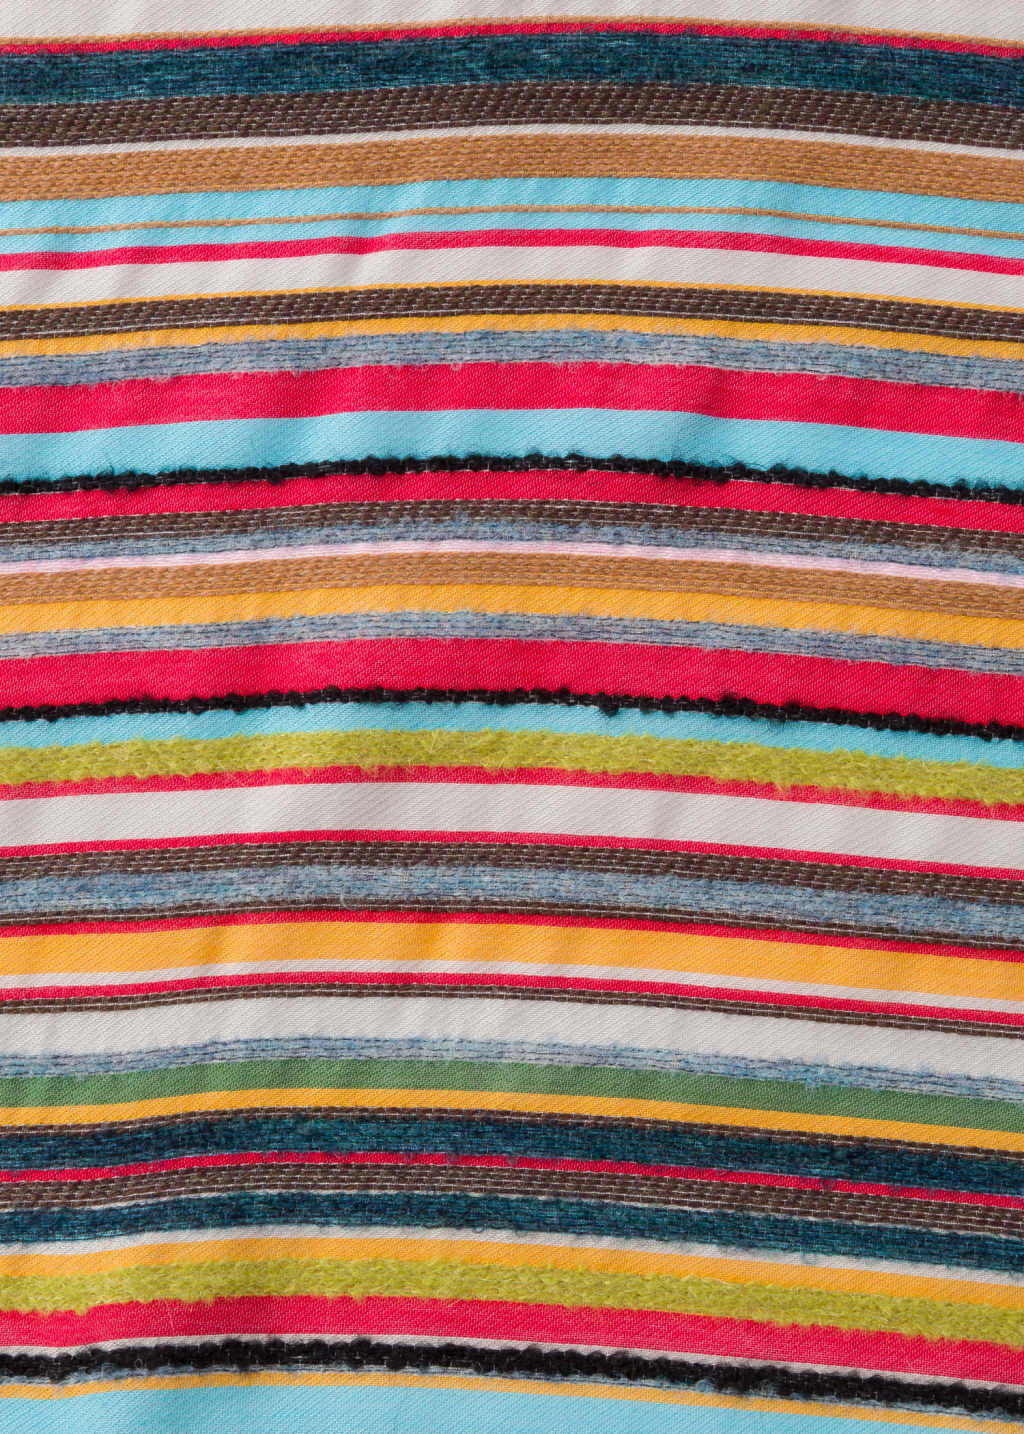 Detail View - Signature Stripe' Textured Scarf Paul Smith